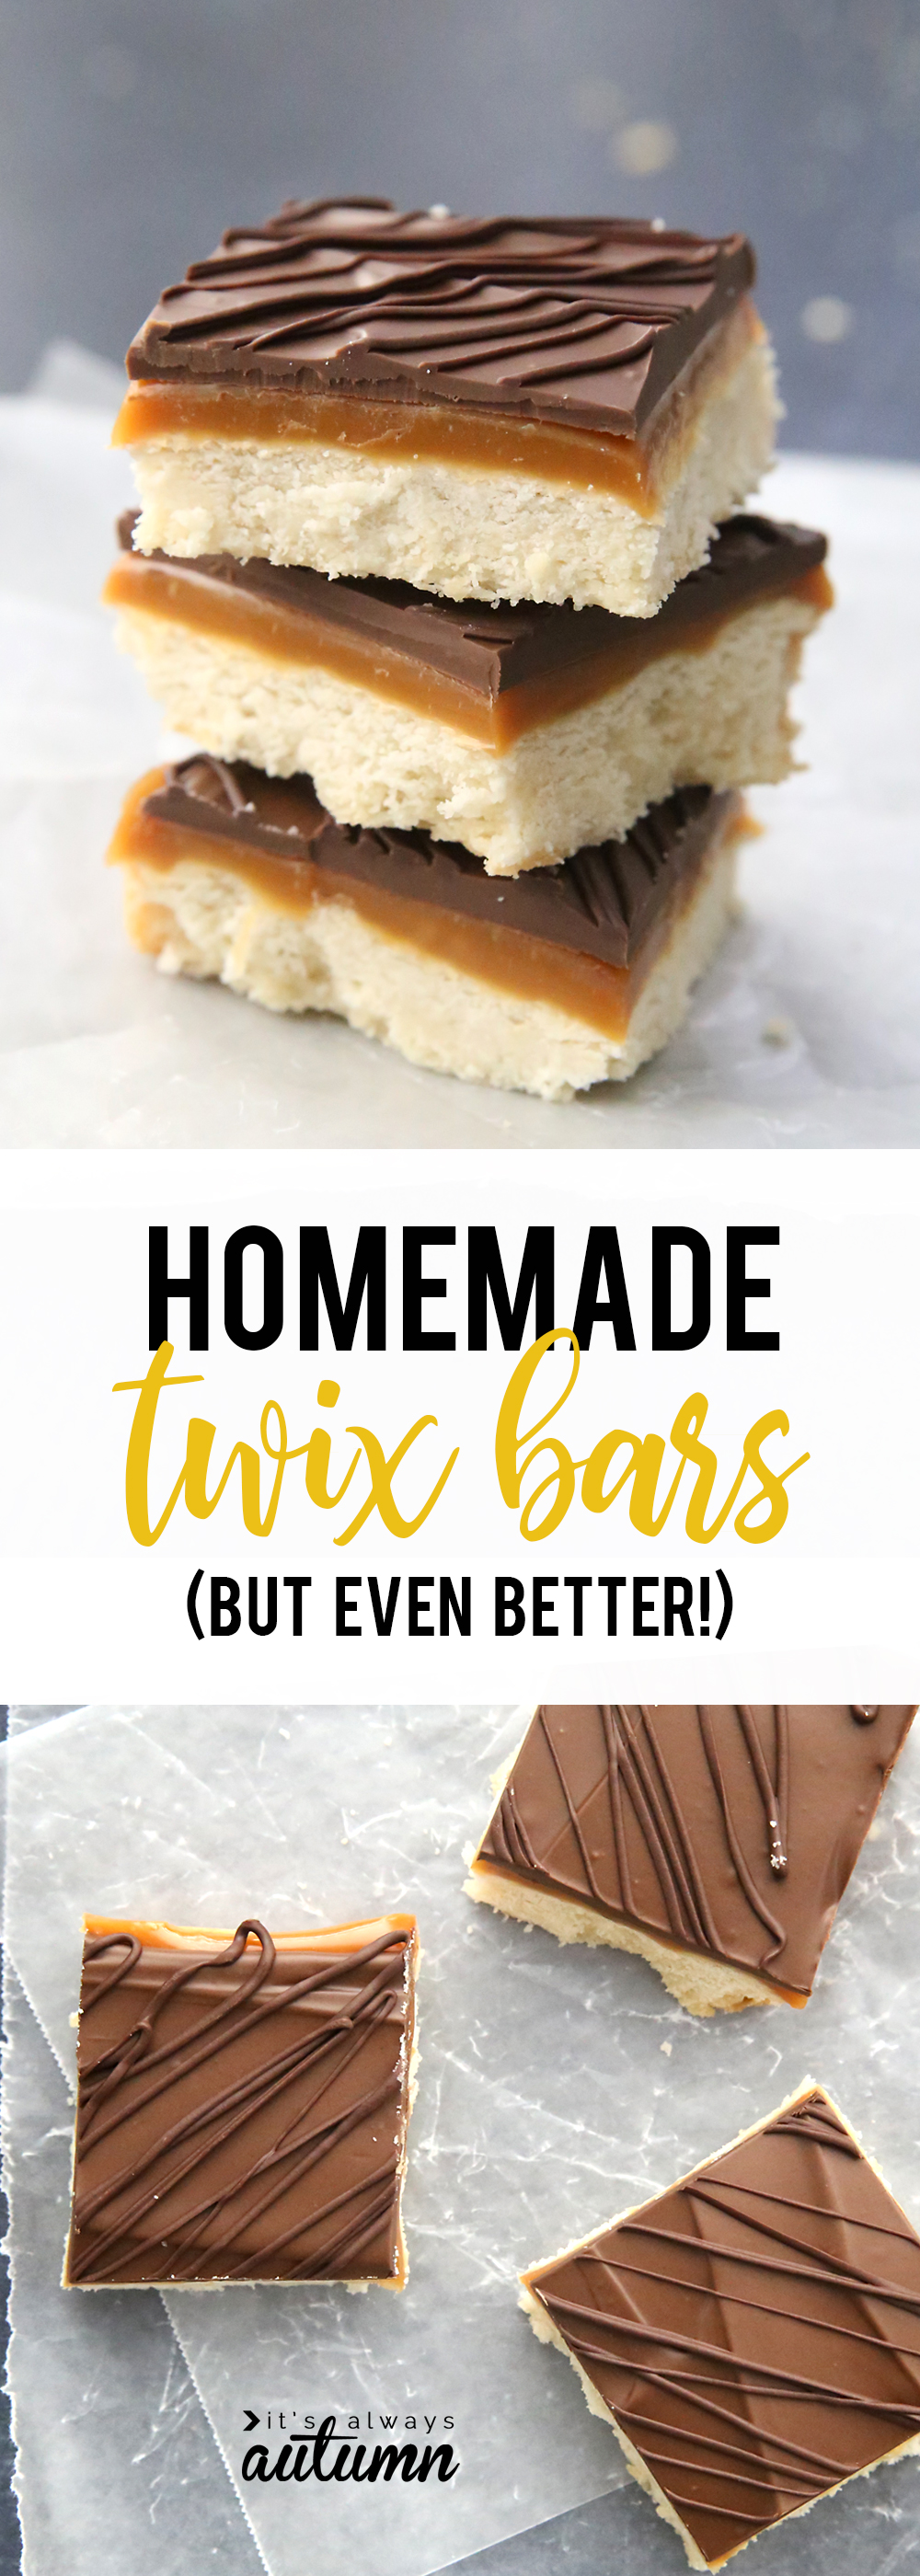 These caramel chocolate shortbread bars are like twix bars, but even better! Easy homemade twix bars recipe.